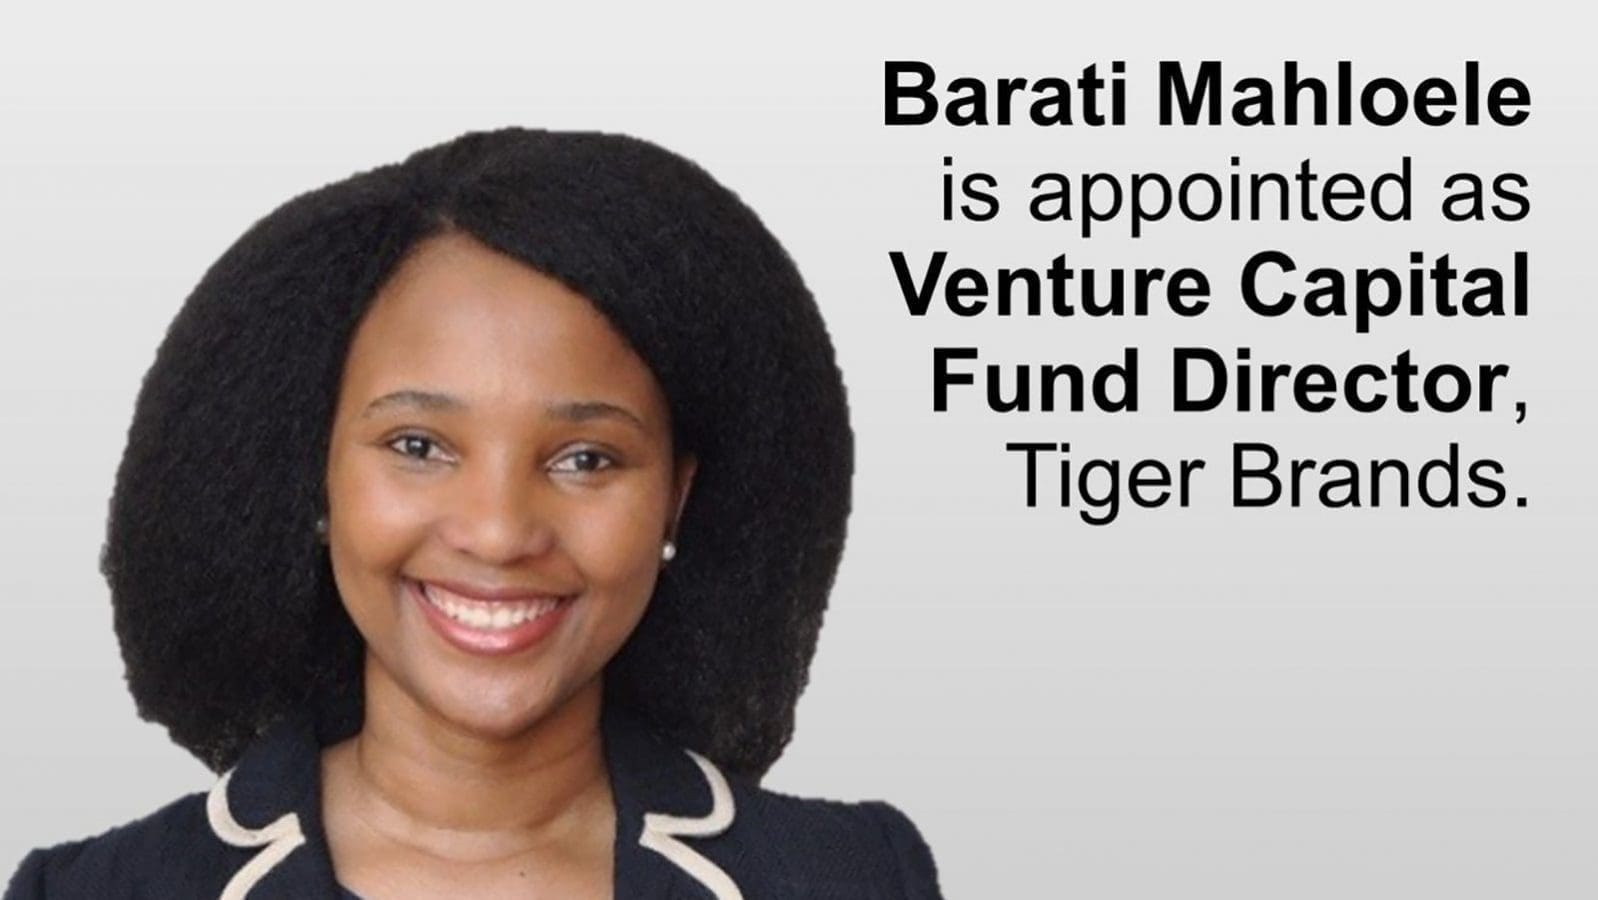 Tiger Brands appoints Barati Mahloele to lead venture capital fund arm